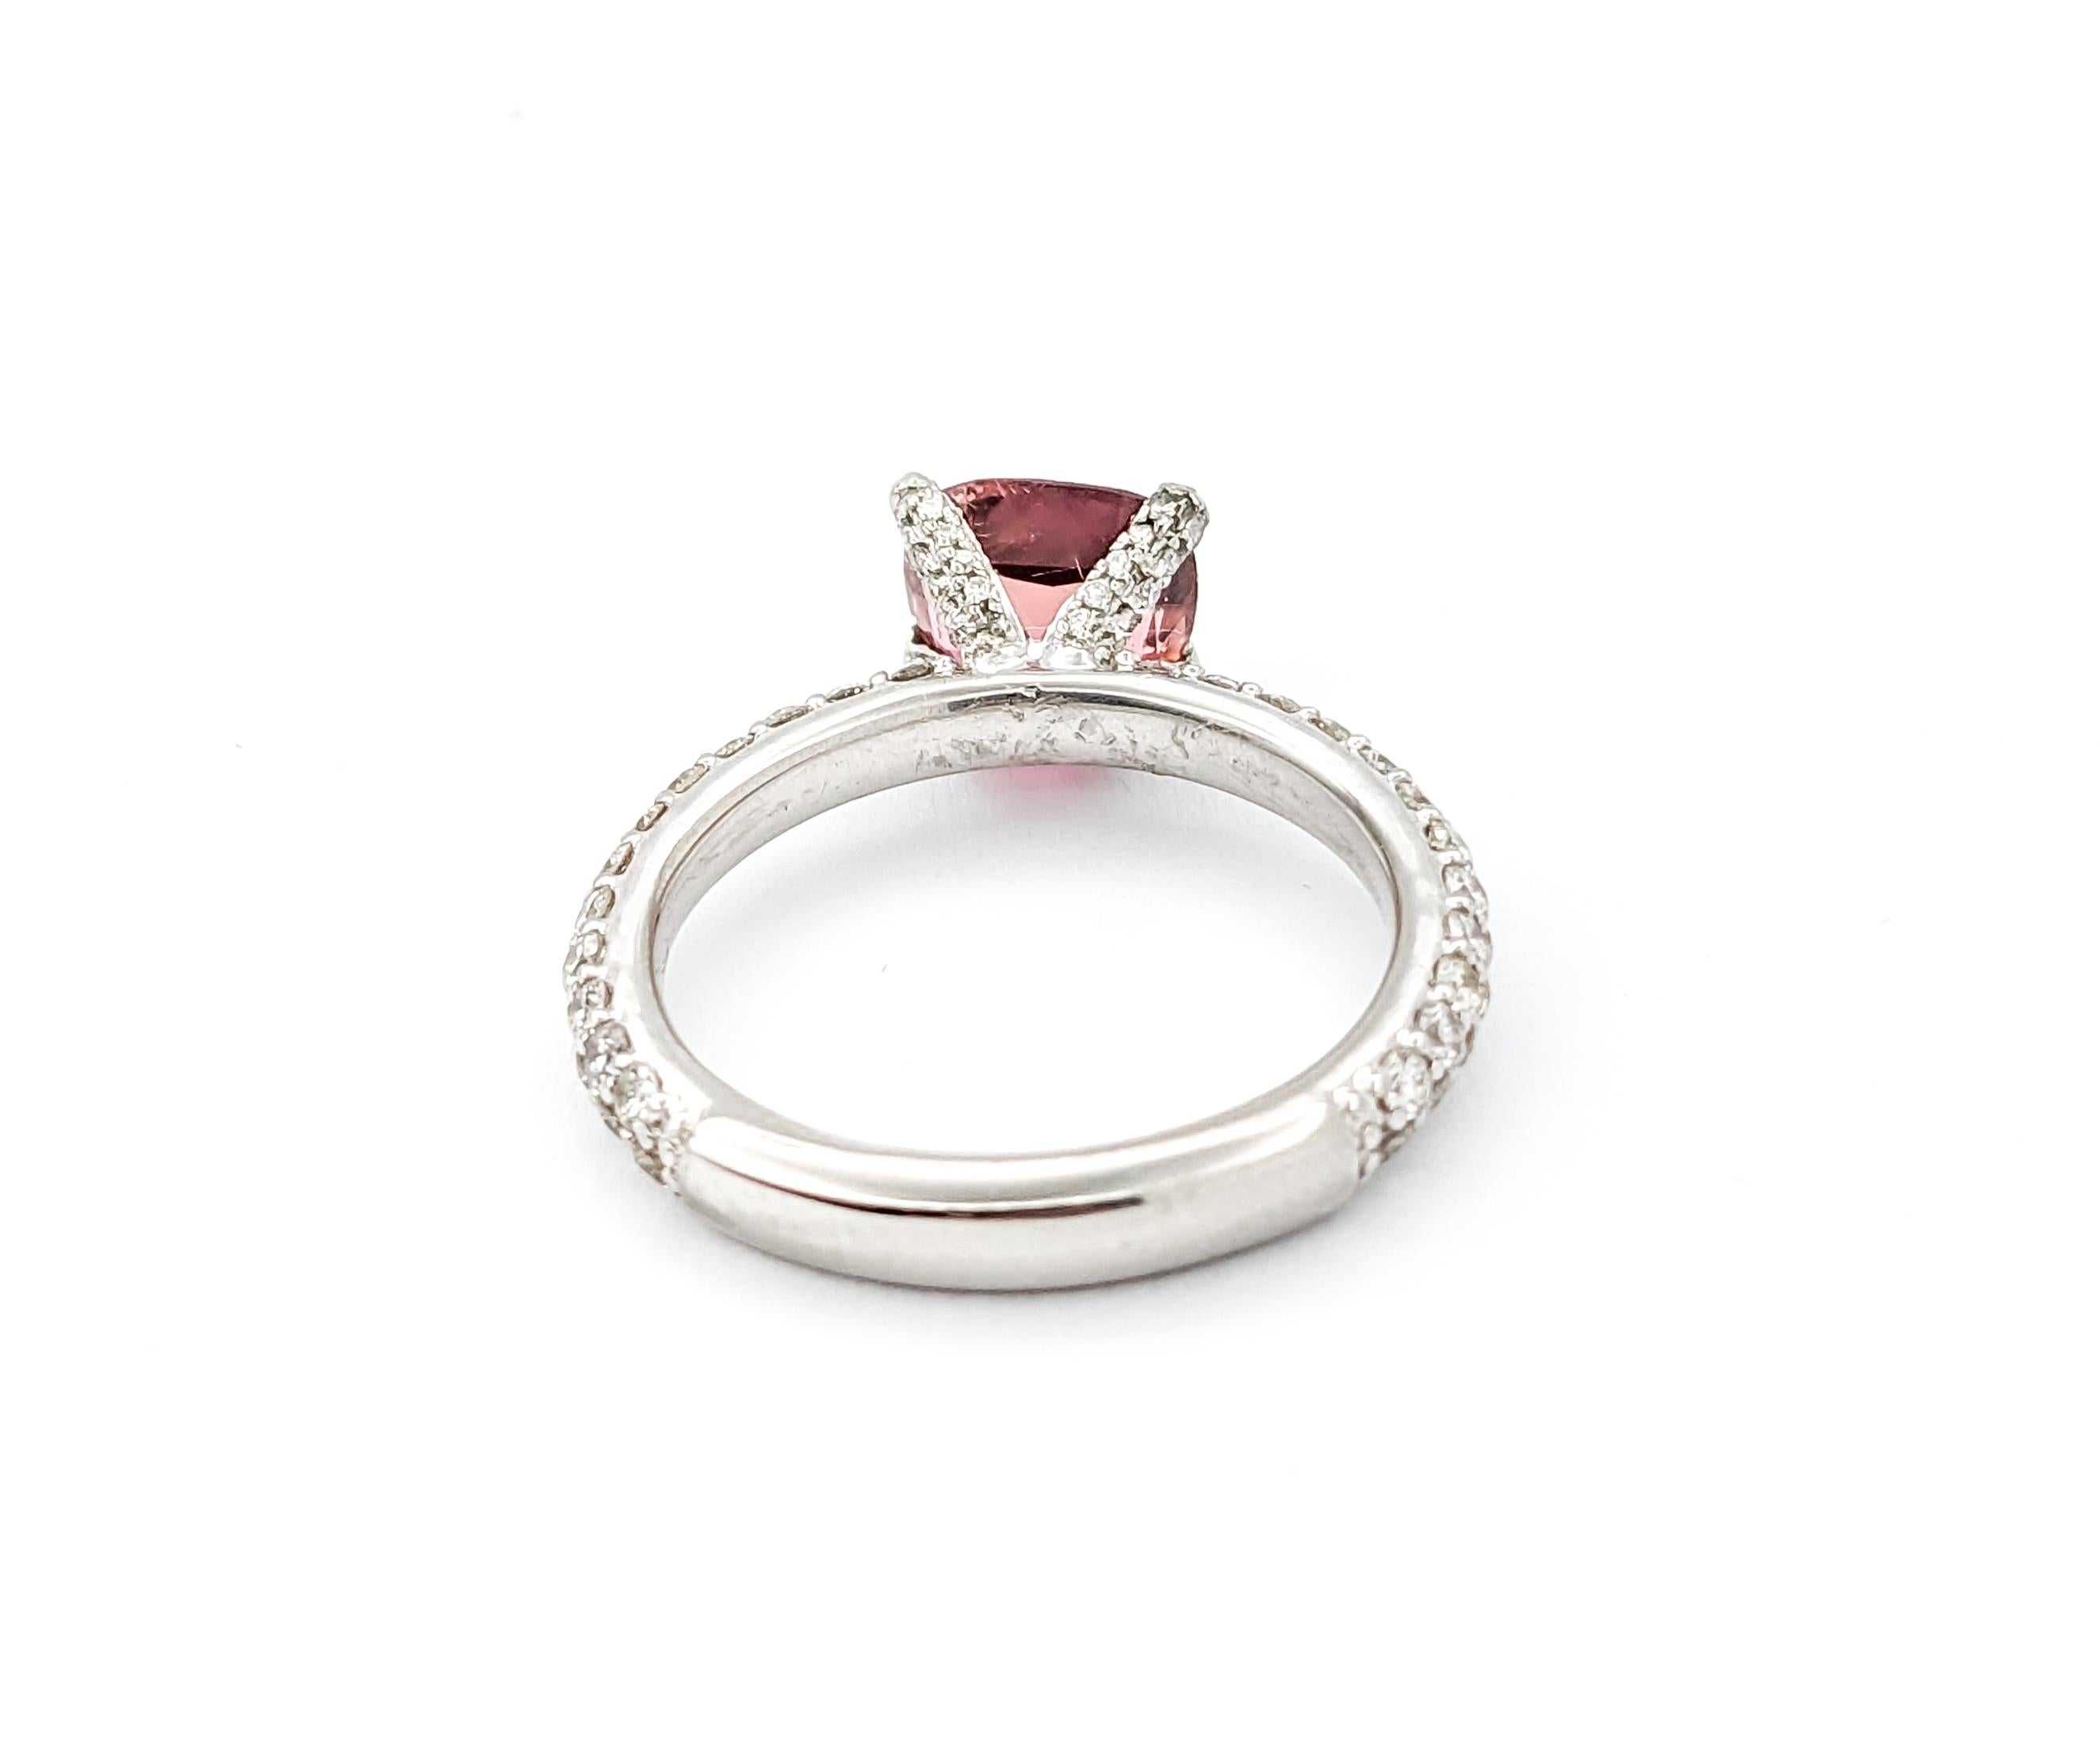 1.50ct Pink Tourmaline  & Diamond Ring In Platinum

Introducing this exquisite Pink Tourmaline ring, masterfully crafted in bright 950 platinum. This ring celebrates a captivating 1.50ct pink tourmaline at its heart. Further enhancing the showy pink